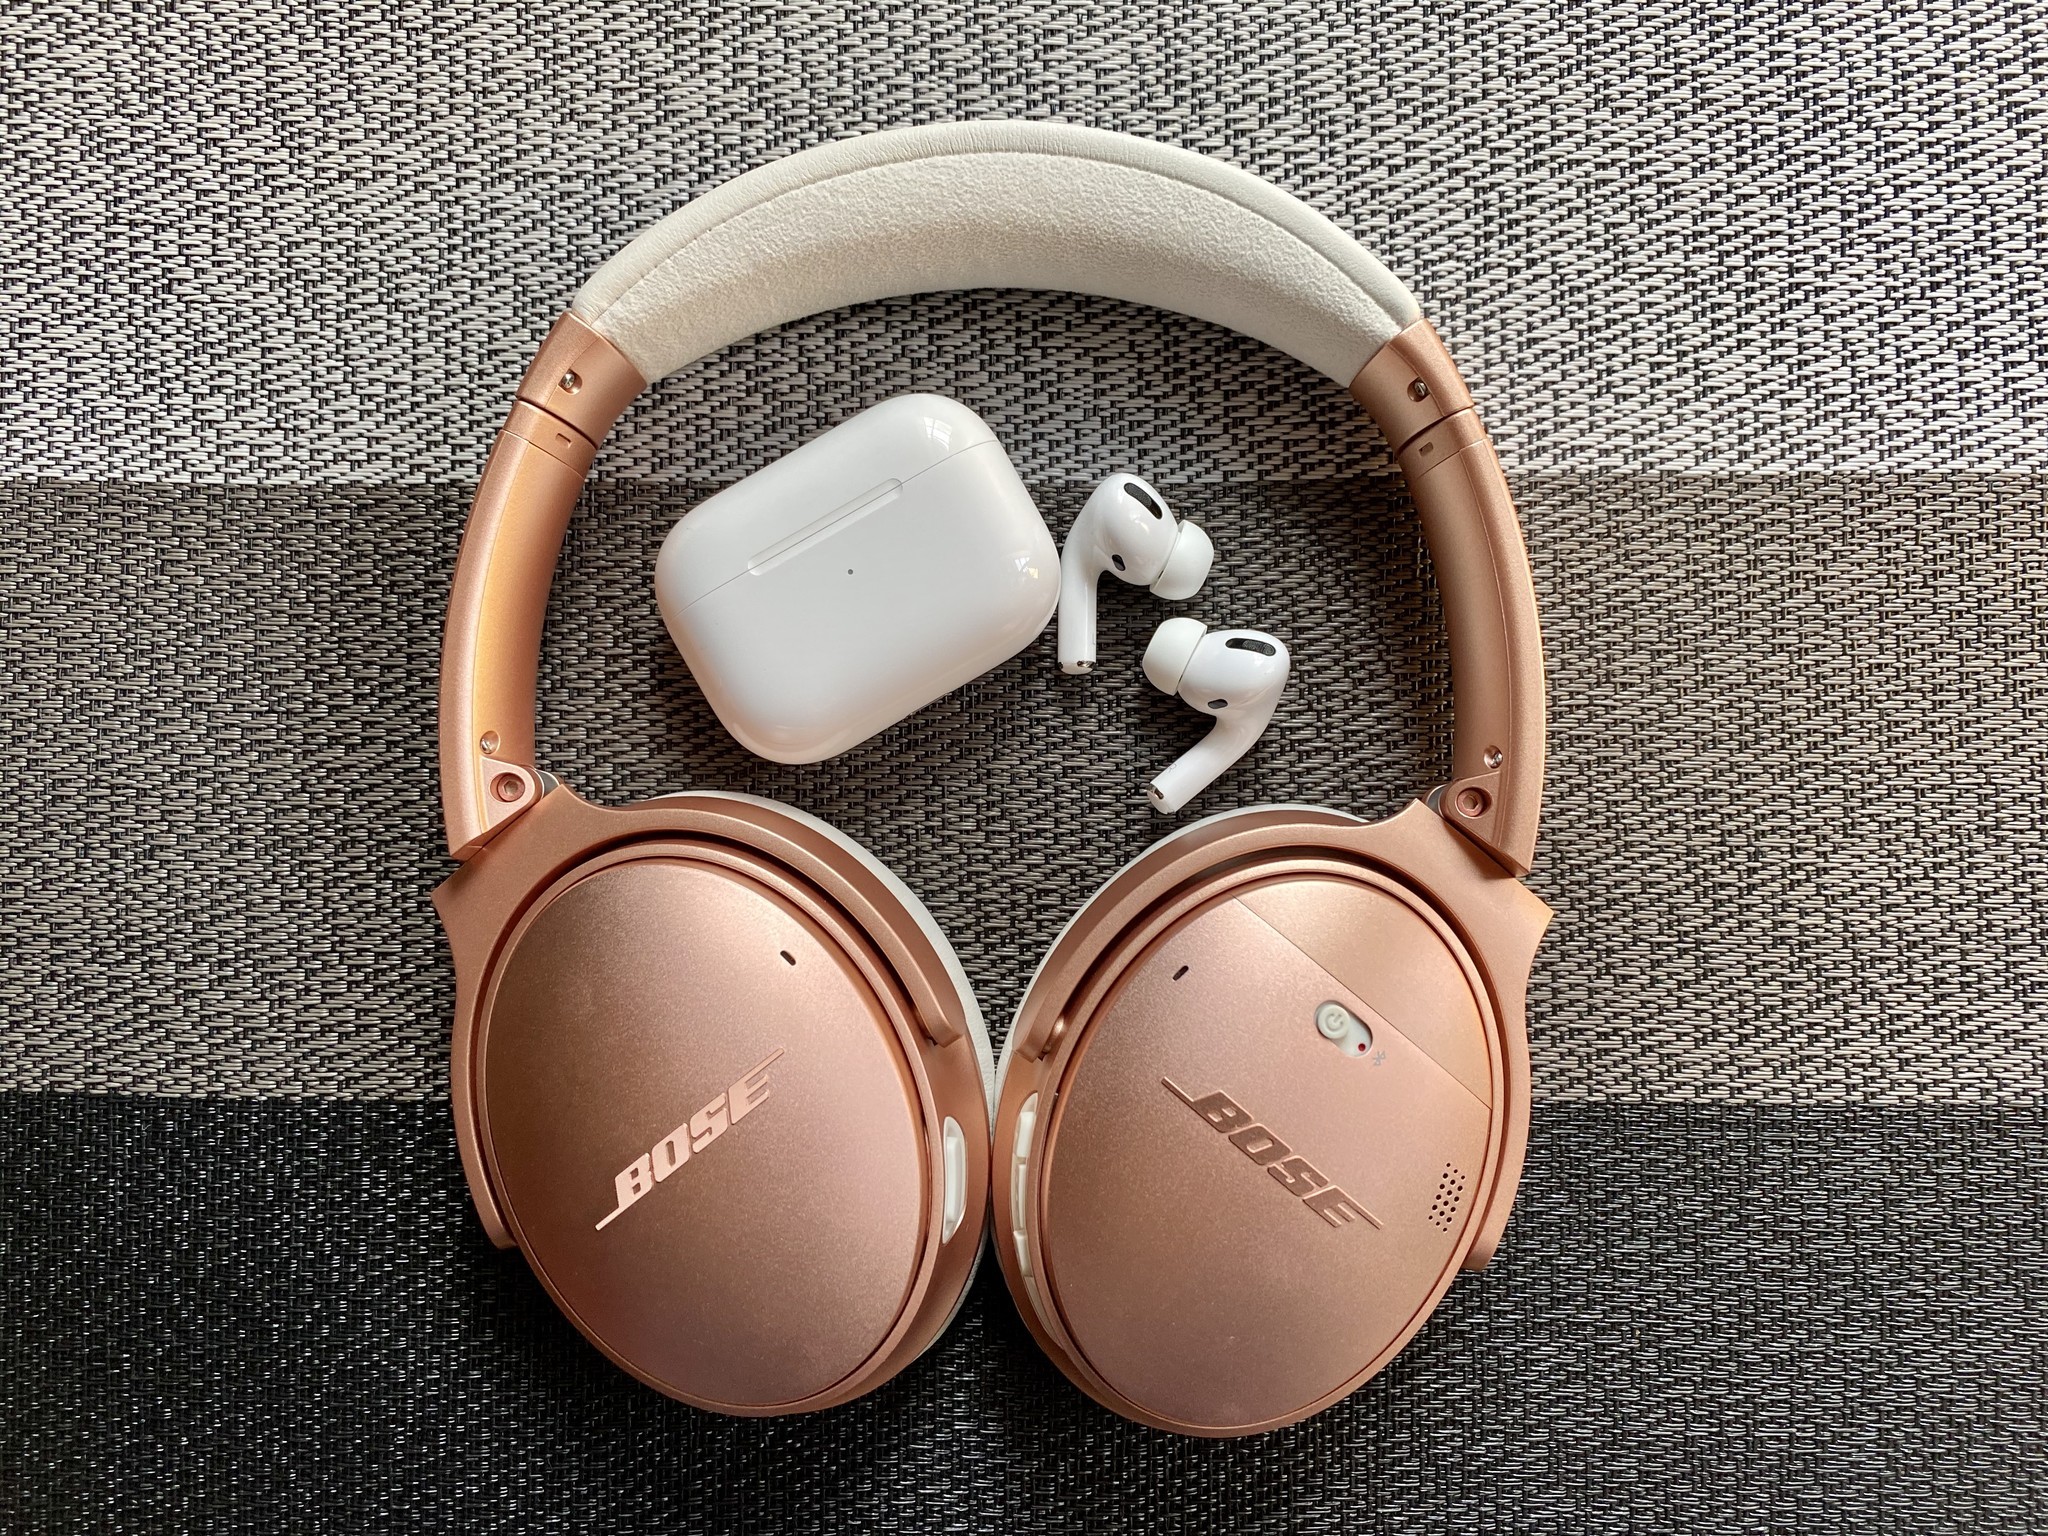 Are the AirPods Pro as good as Bose QuietComfort 35 II? | iMore